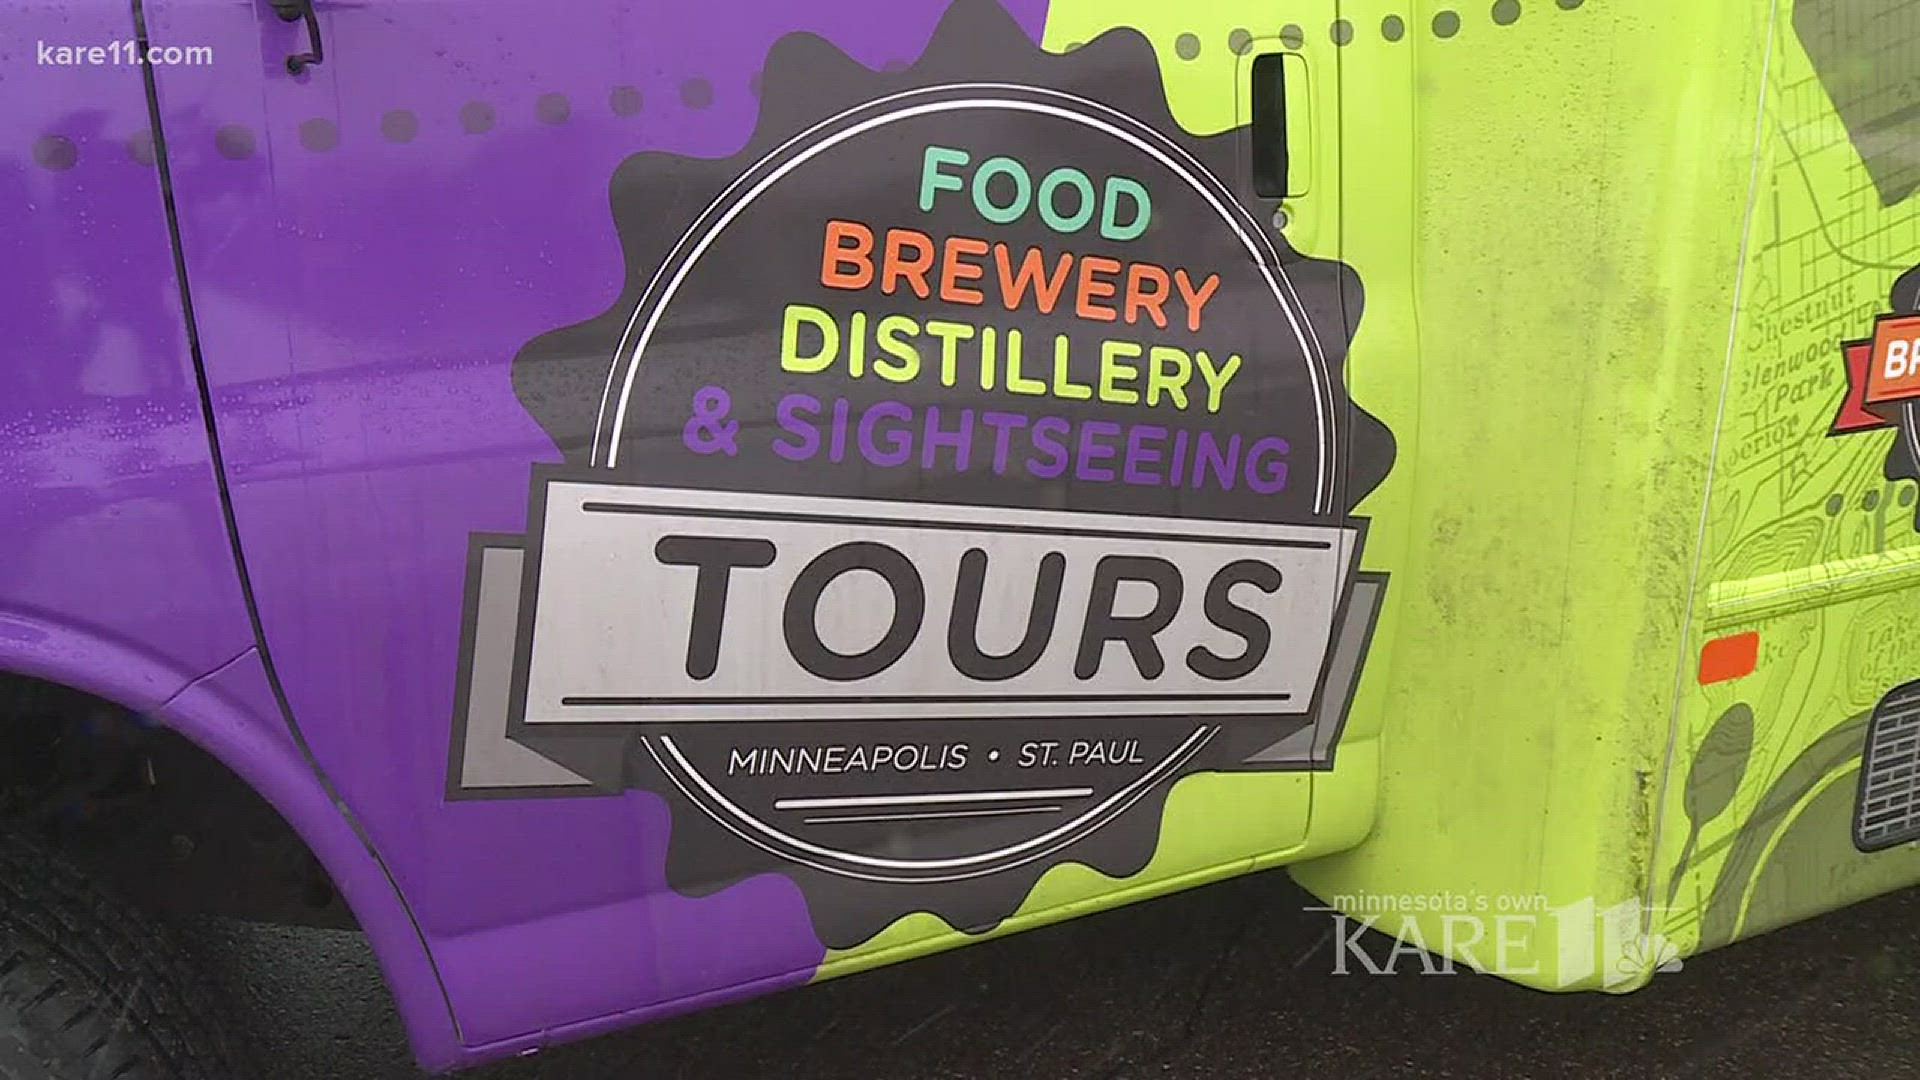 The Experience the Twin Cities tour bus will take you on an adventure around the cities to places like restaurants, breweries and local sites.